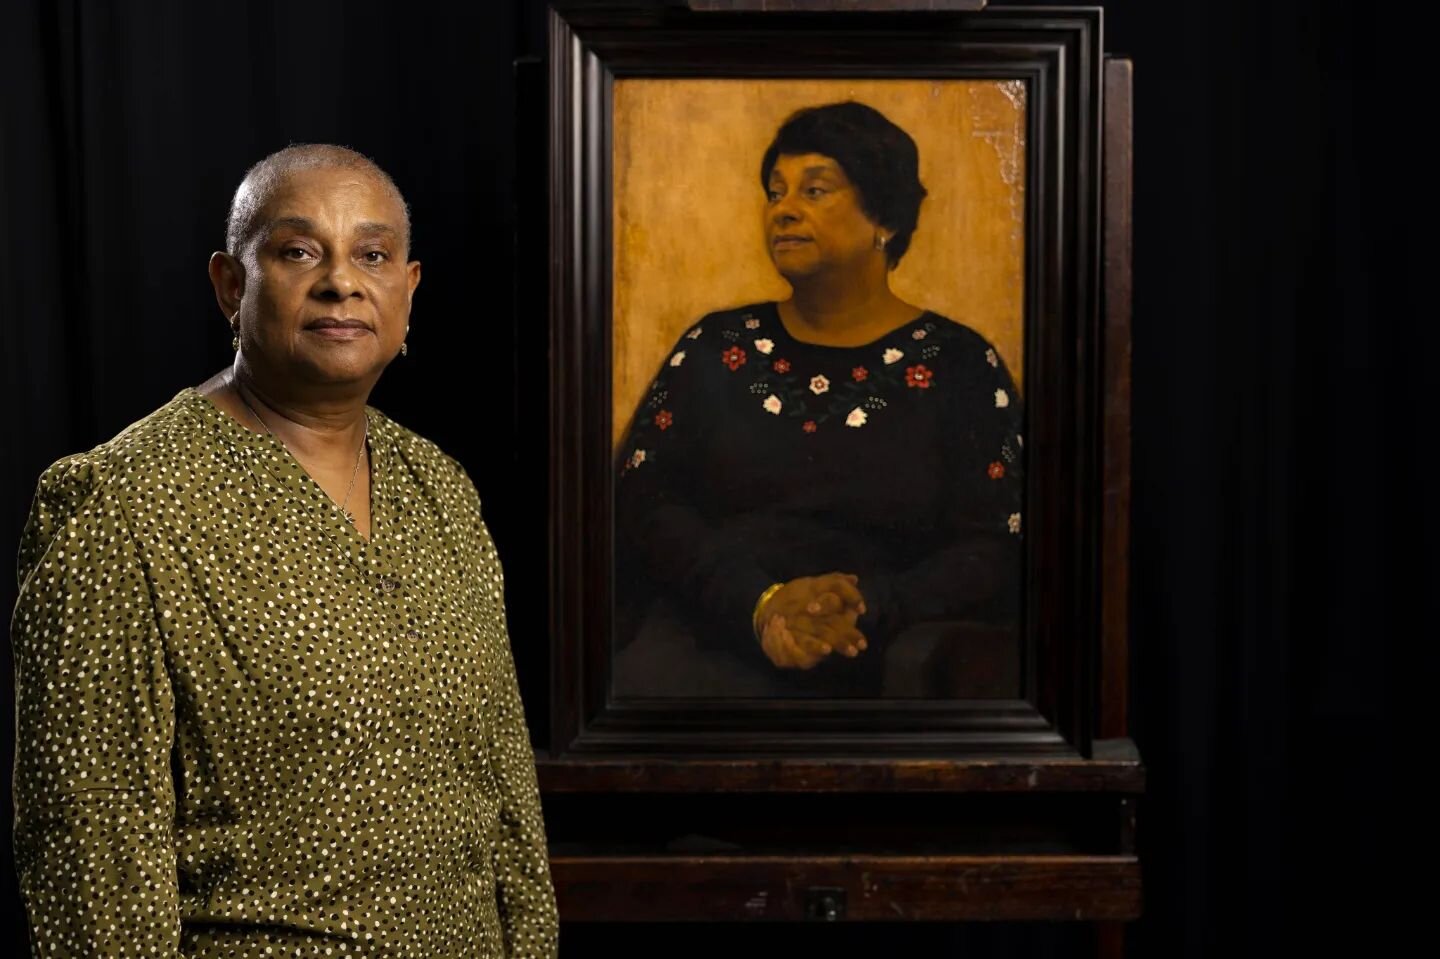 It was an honour to photograph Baroness Doreen Lawrence with her portrait by Thomas Ganter for the @nationalportraitgallery ahead of Stephen Lawrence Day.
Usage in @thetimes @telegraph @dailymirror

@dlawrenceobe #slday23 #portrait #art #gallery #pho